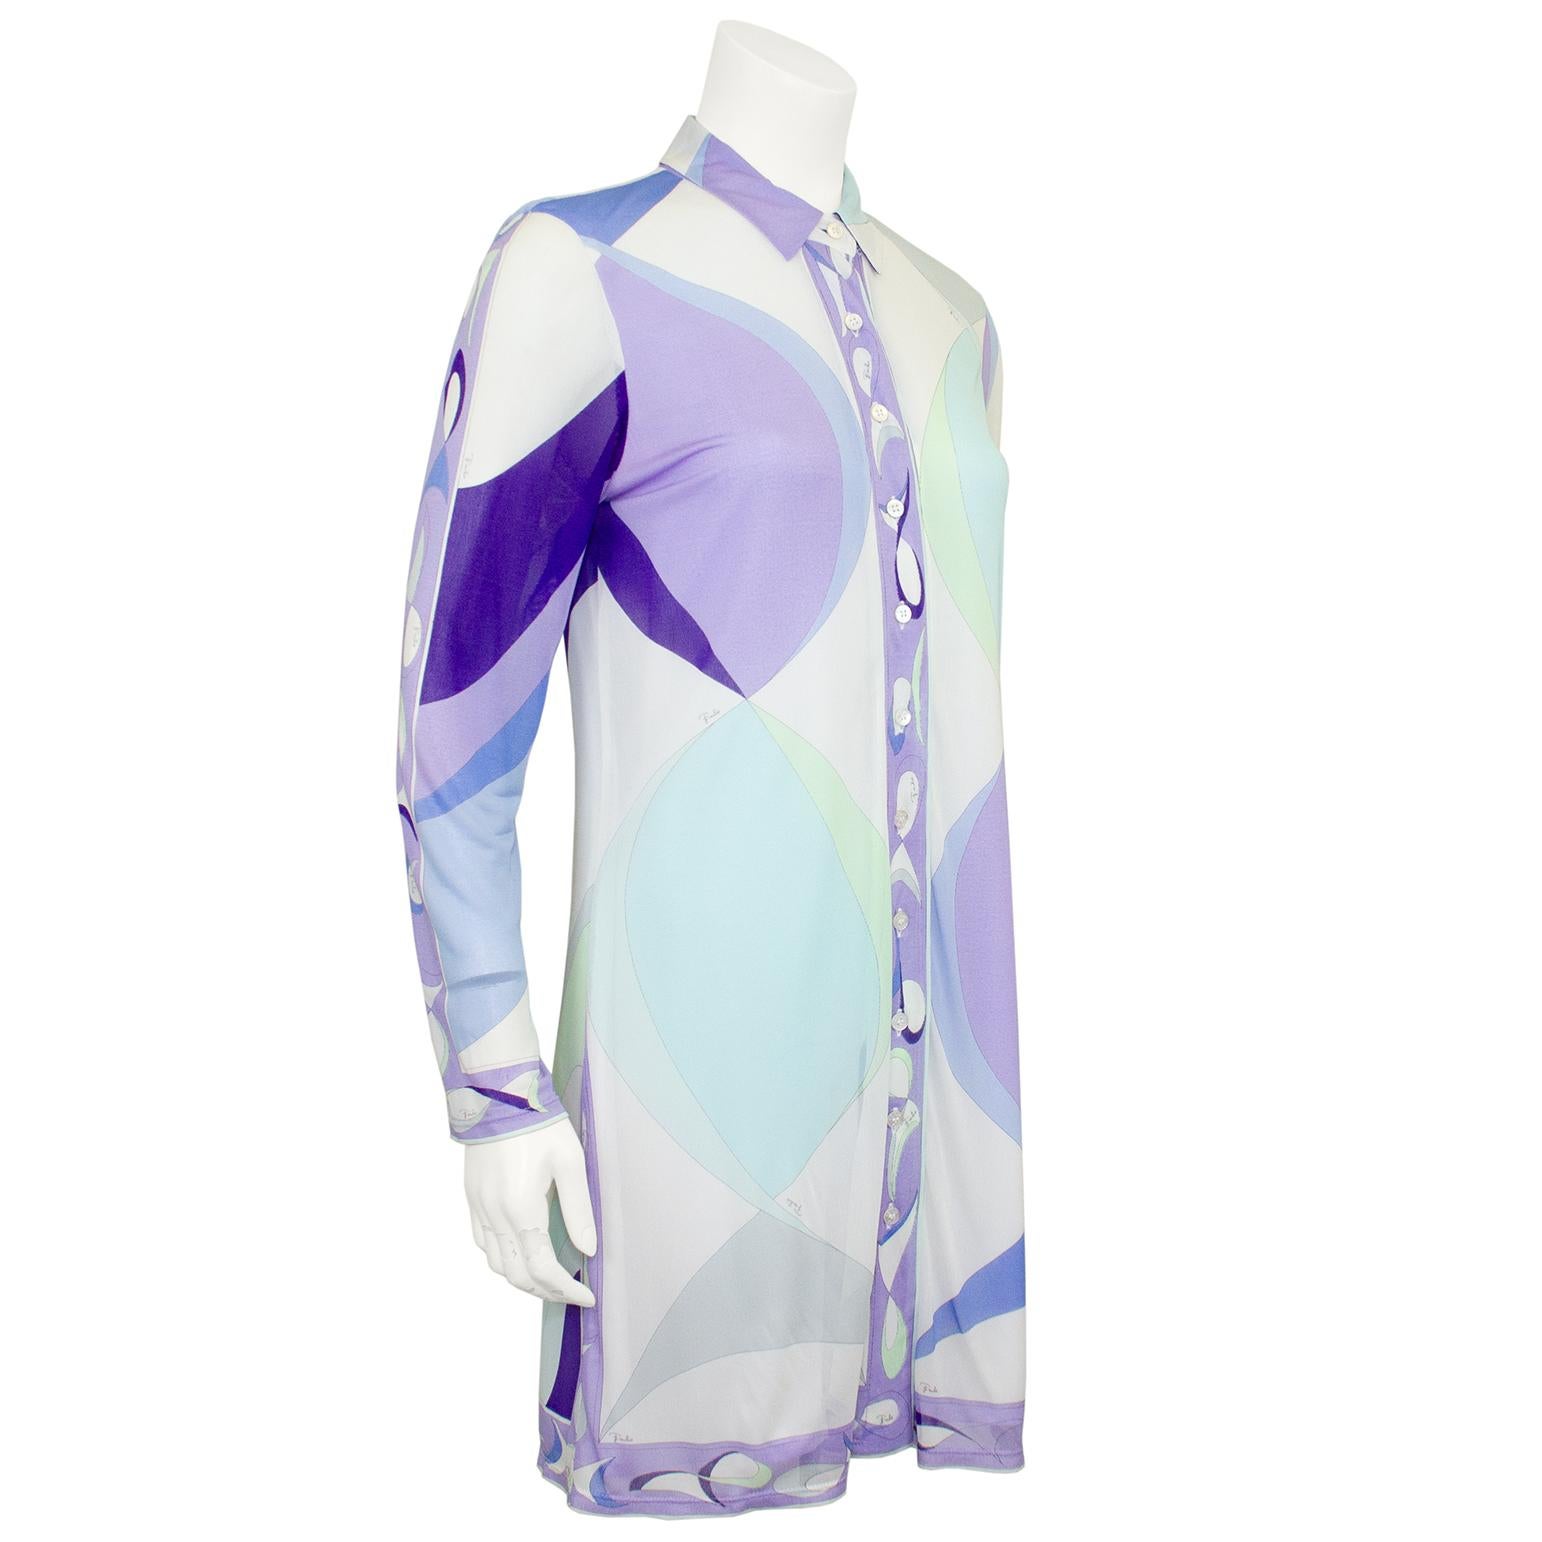 Great Emilio Pucci piece from the 1990s. Abstract printed sheer with shades of pale blues, lavender and deep purple. Body is lined and very slightly sheer, sleeves are unlined and sheer. Can be worn with jeans or as a bathing suit cover up when on